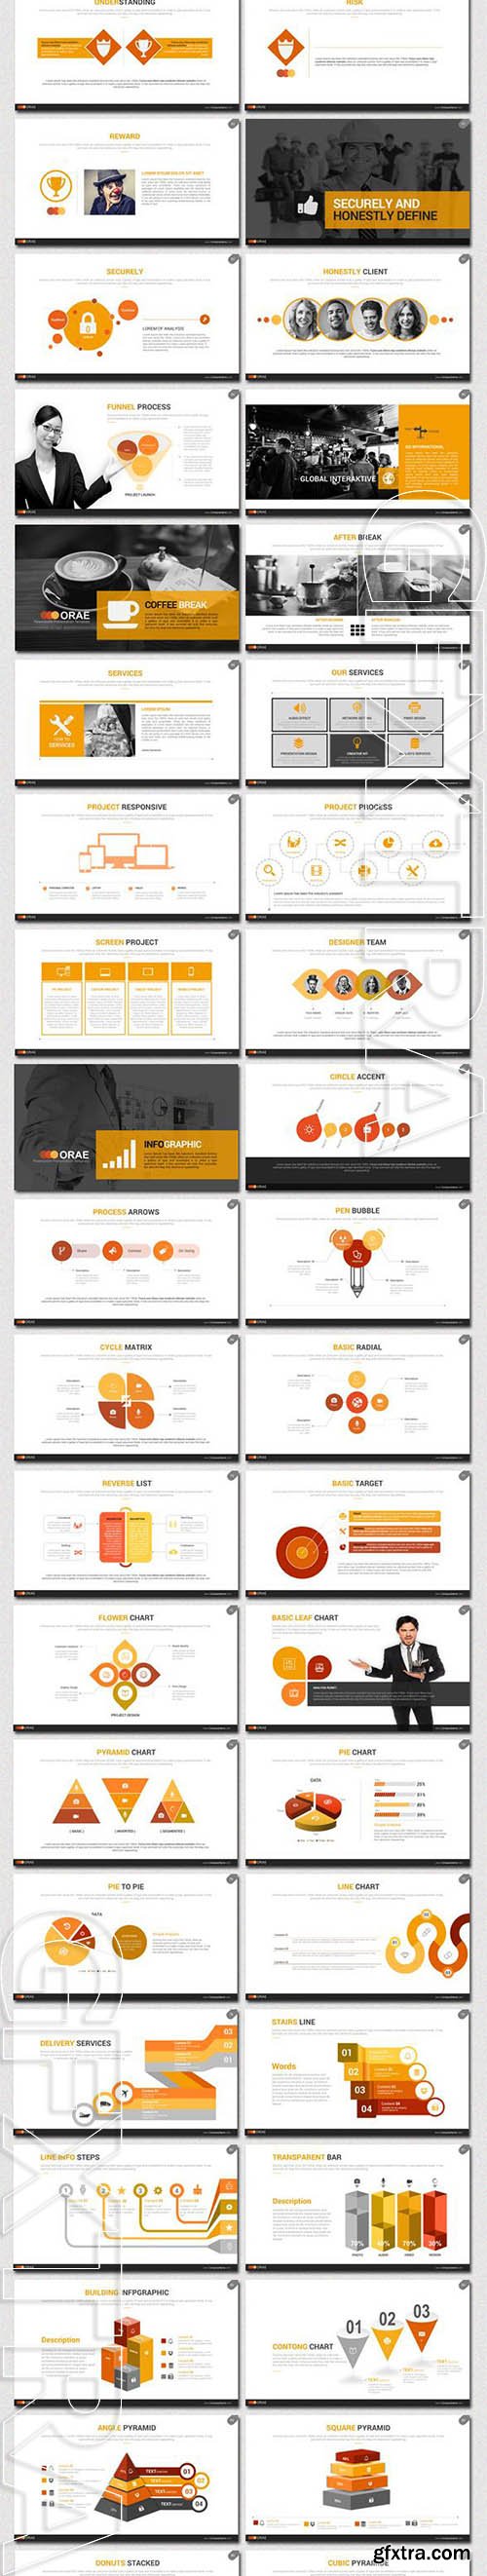 Orae Powerpoint Template - Graphicriver 9654689